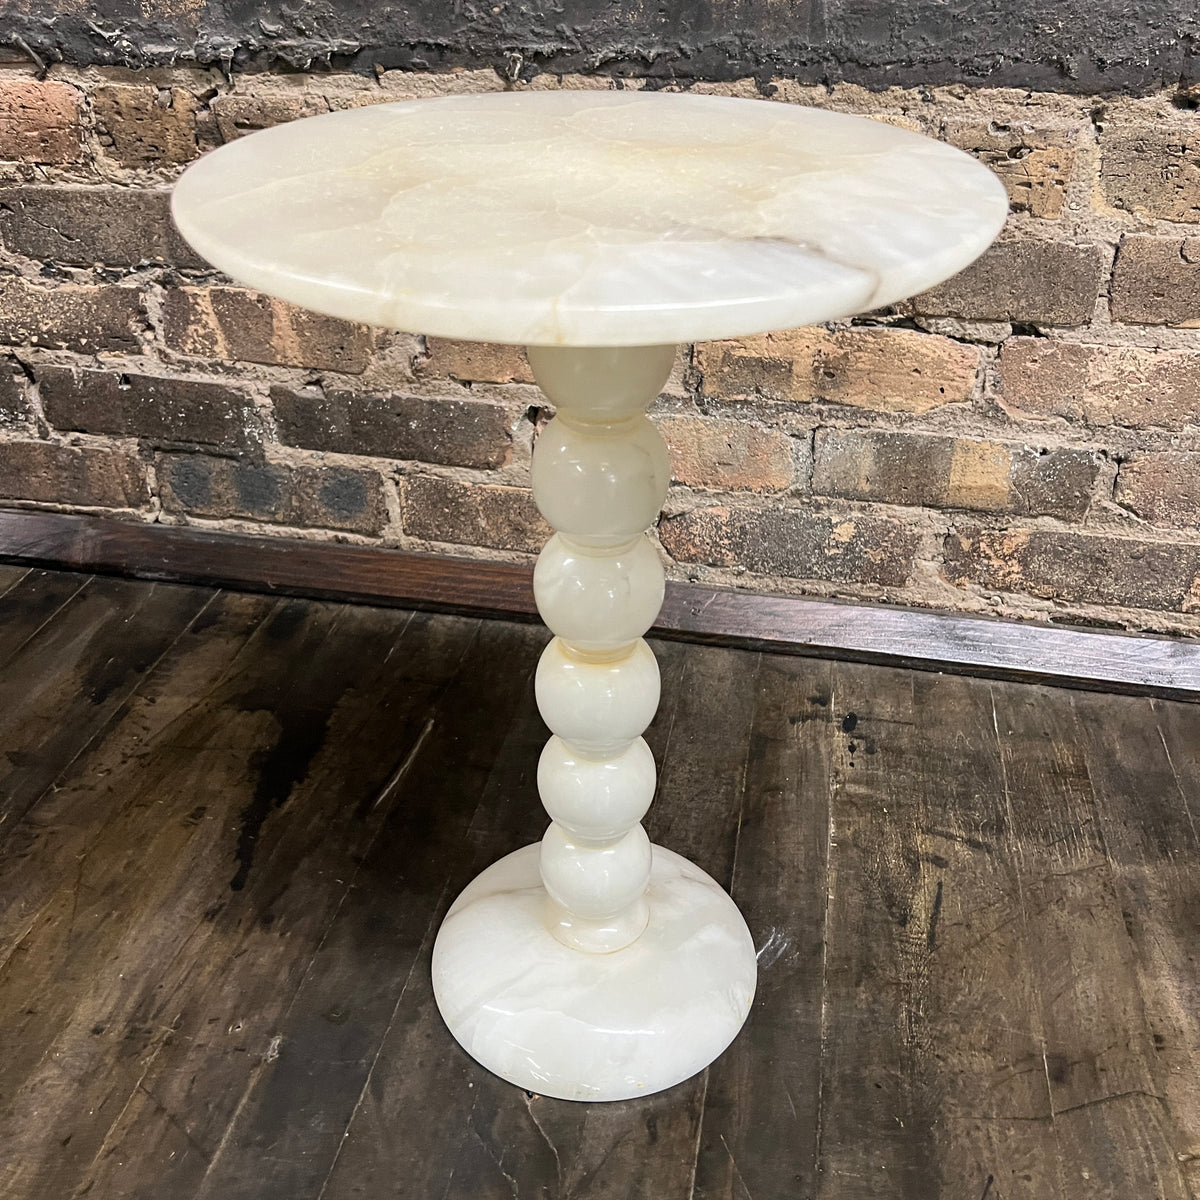 Lovely petite natural stone mid-century cocktail or drinks table.  It has a round base and a bobbin style support with a round table top.   It is primarily off-white with gray and some gold.  It is lovely.  No chips.  11.75" diameter.  Studio Sonja Milan, Chicago, IL Mid-century modern Furniture Chicago